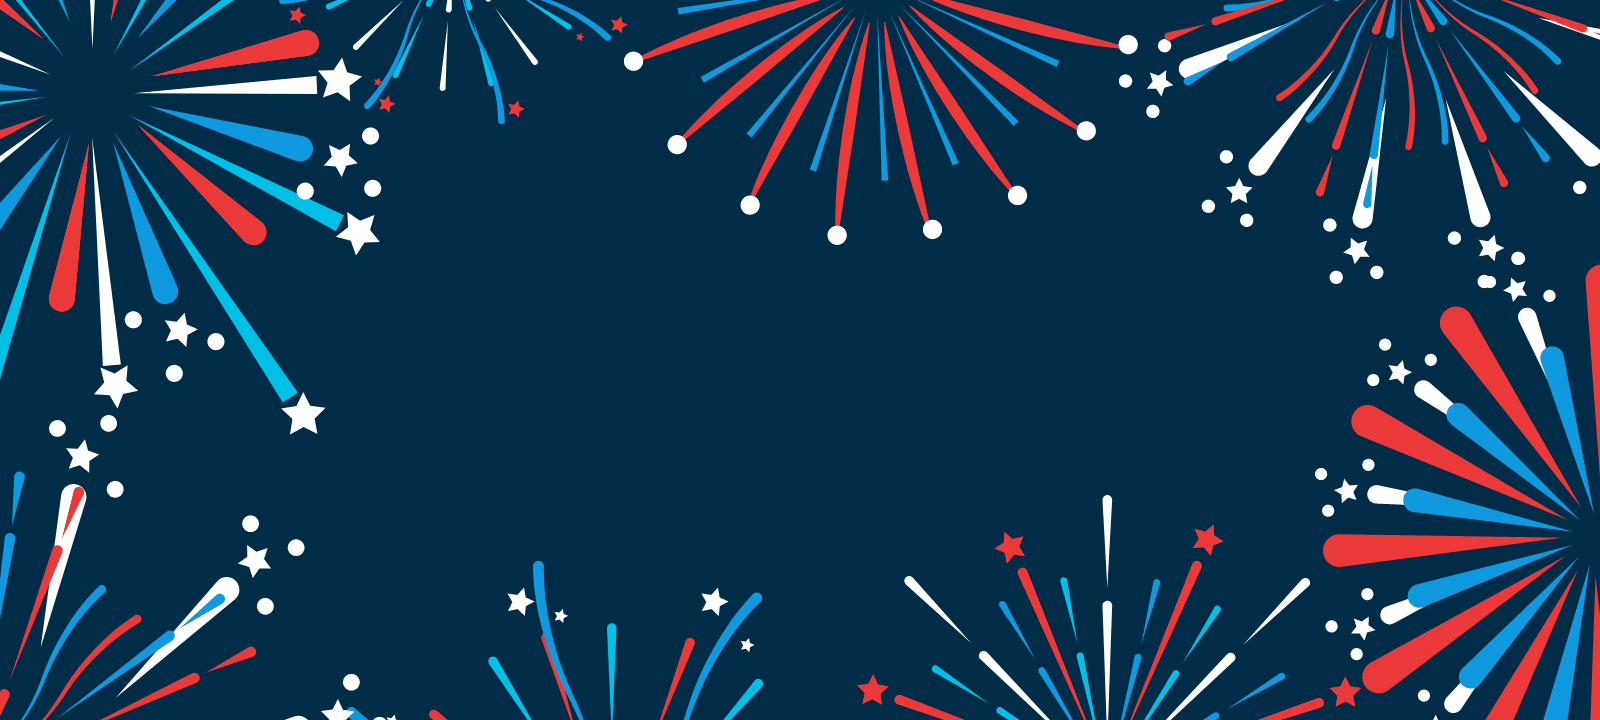 Wishing you a safe and happy Independence Day!